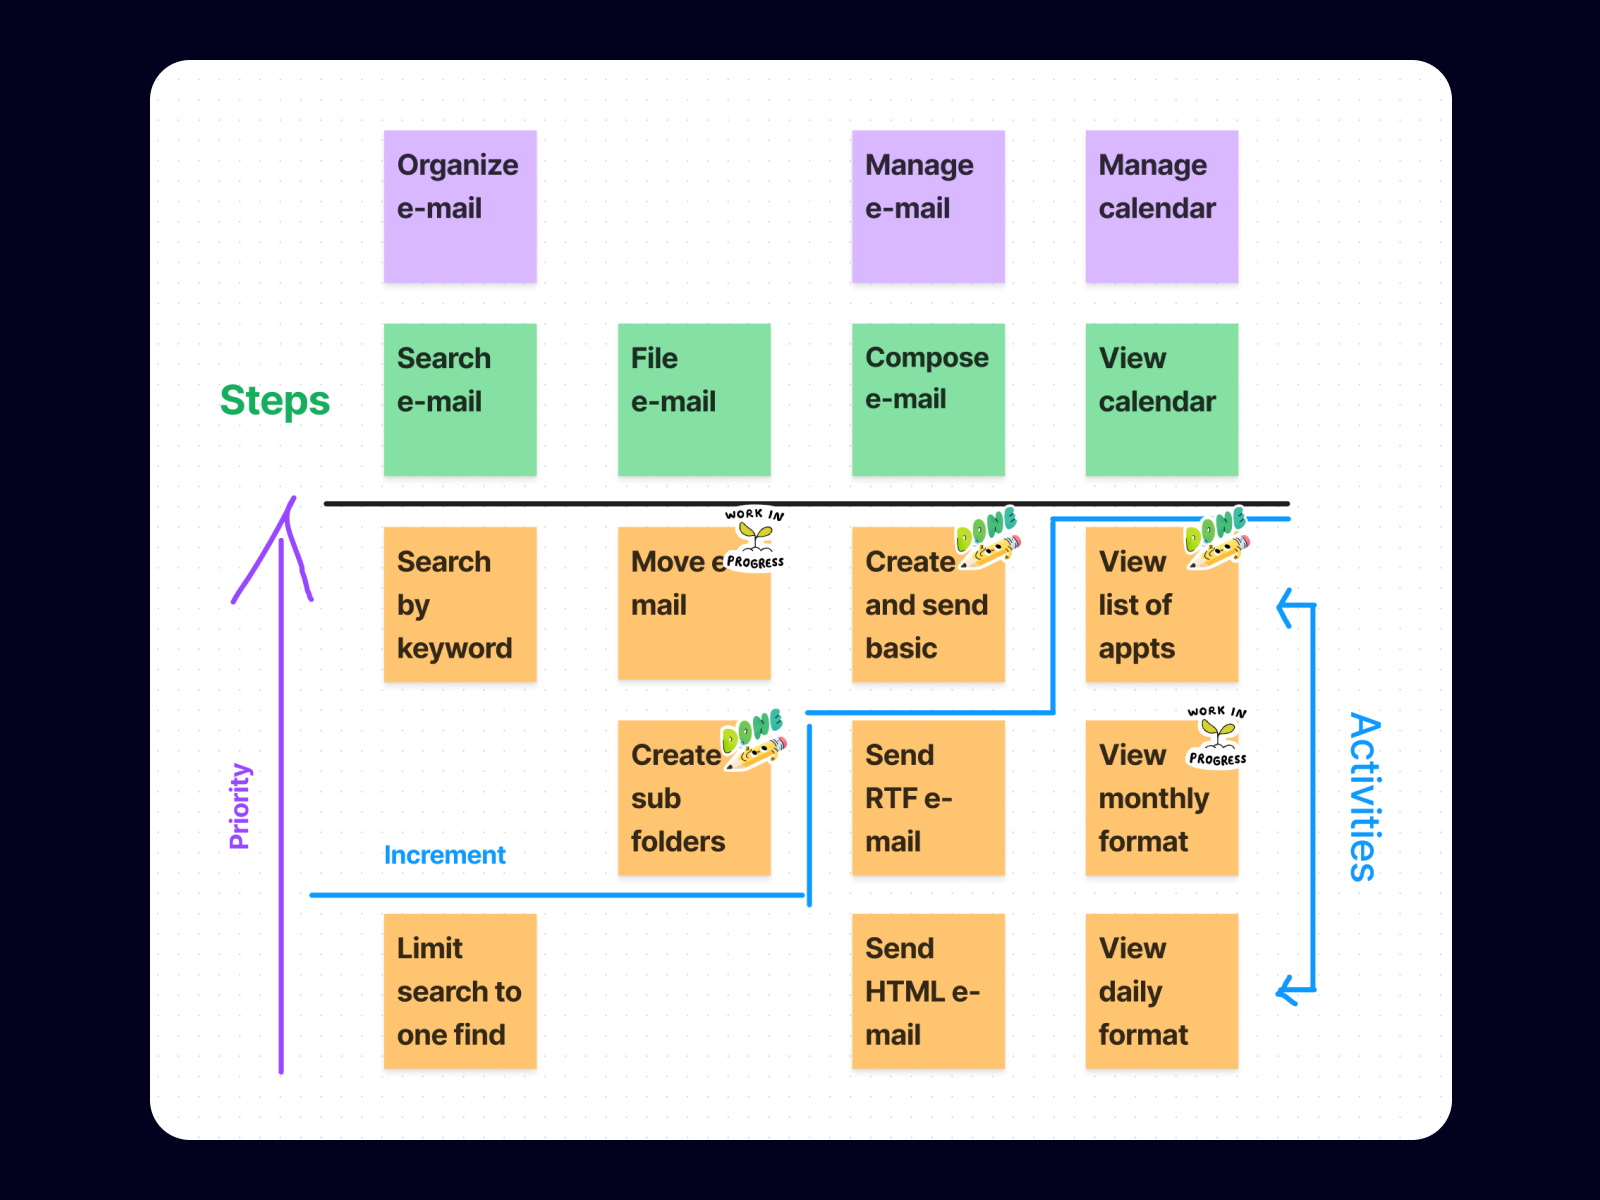 User story mapping helps bring the product vision to life